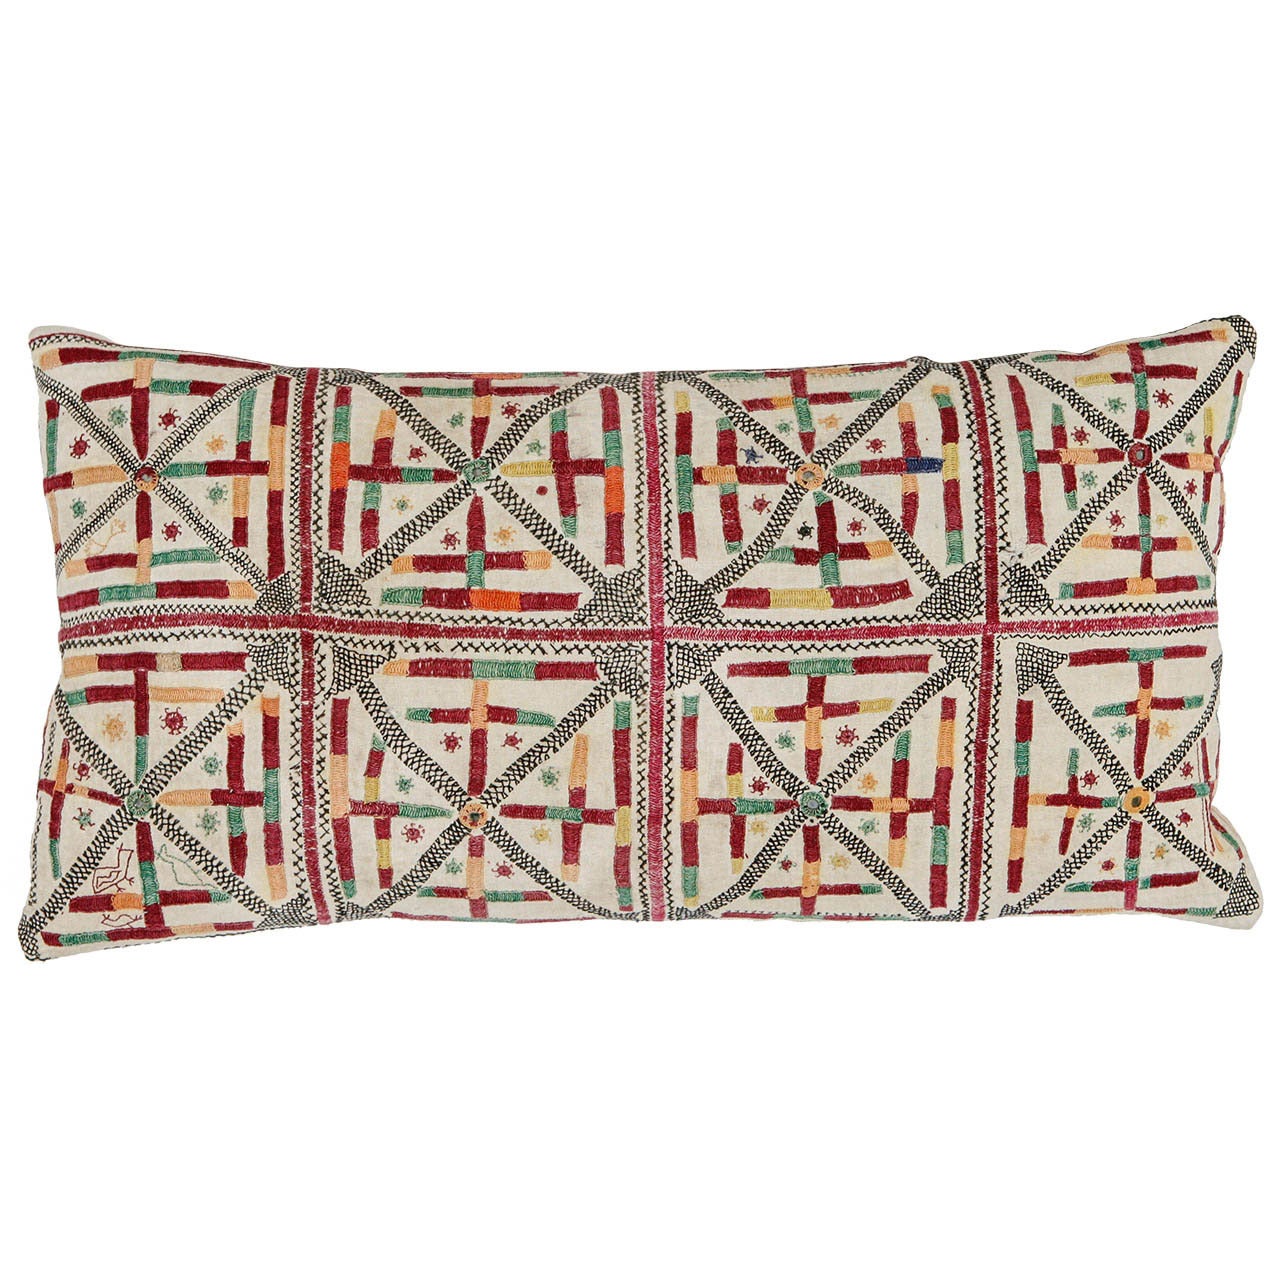 Gujarati Indian Embroidered Pillow